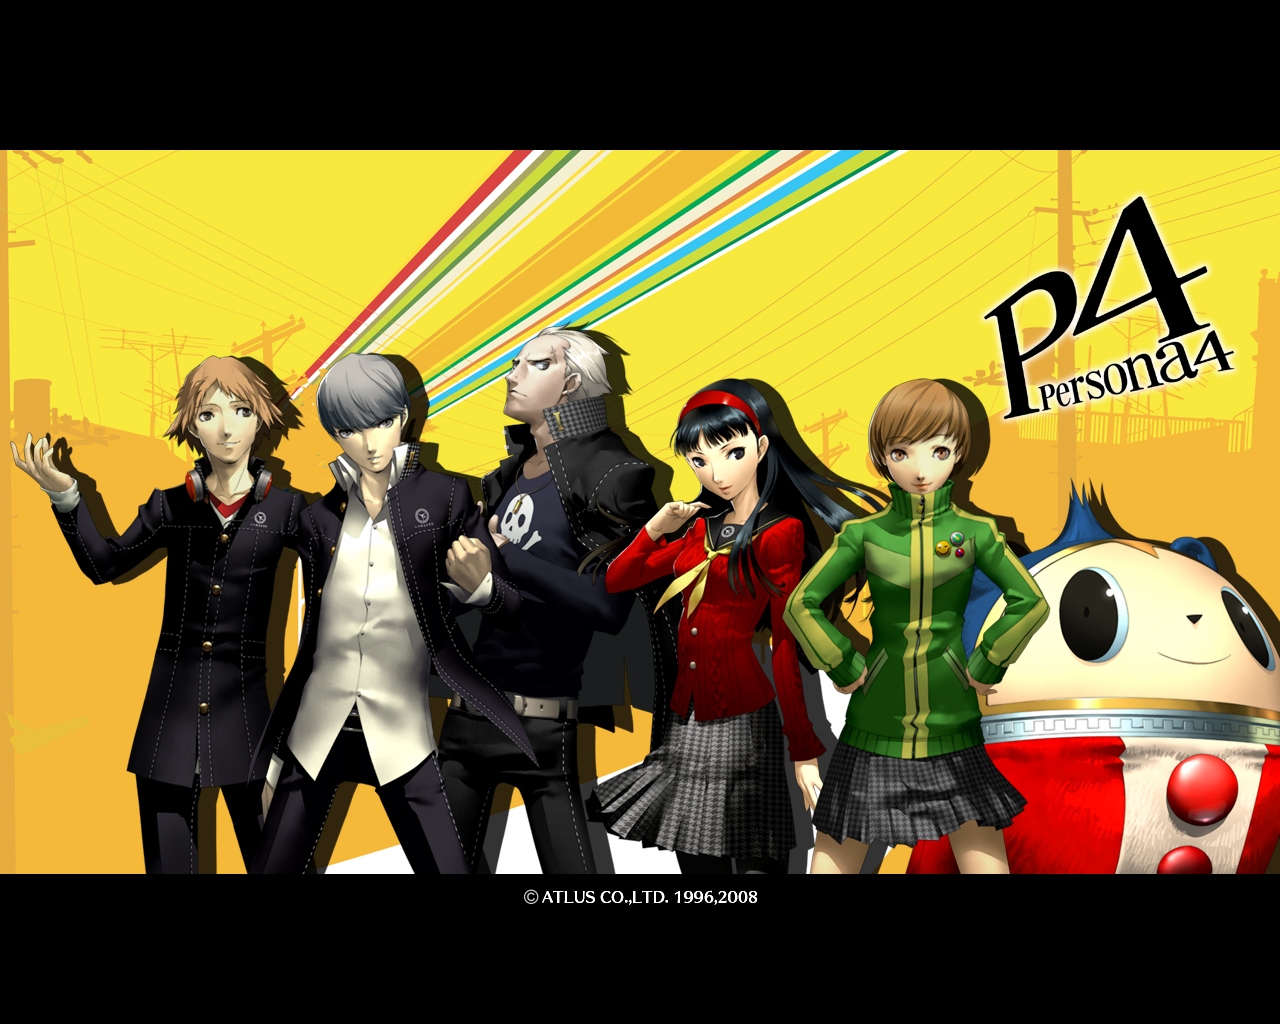 Game Console News: Persona Wallpaper Gallery